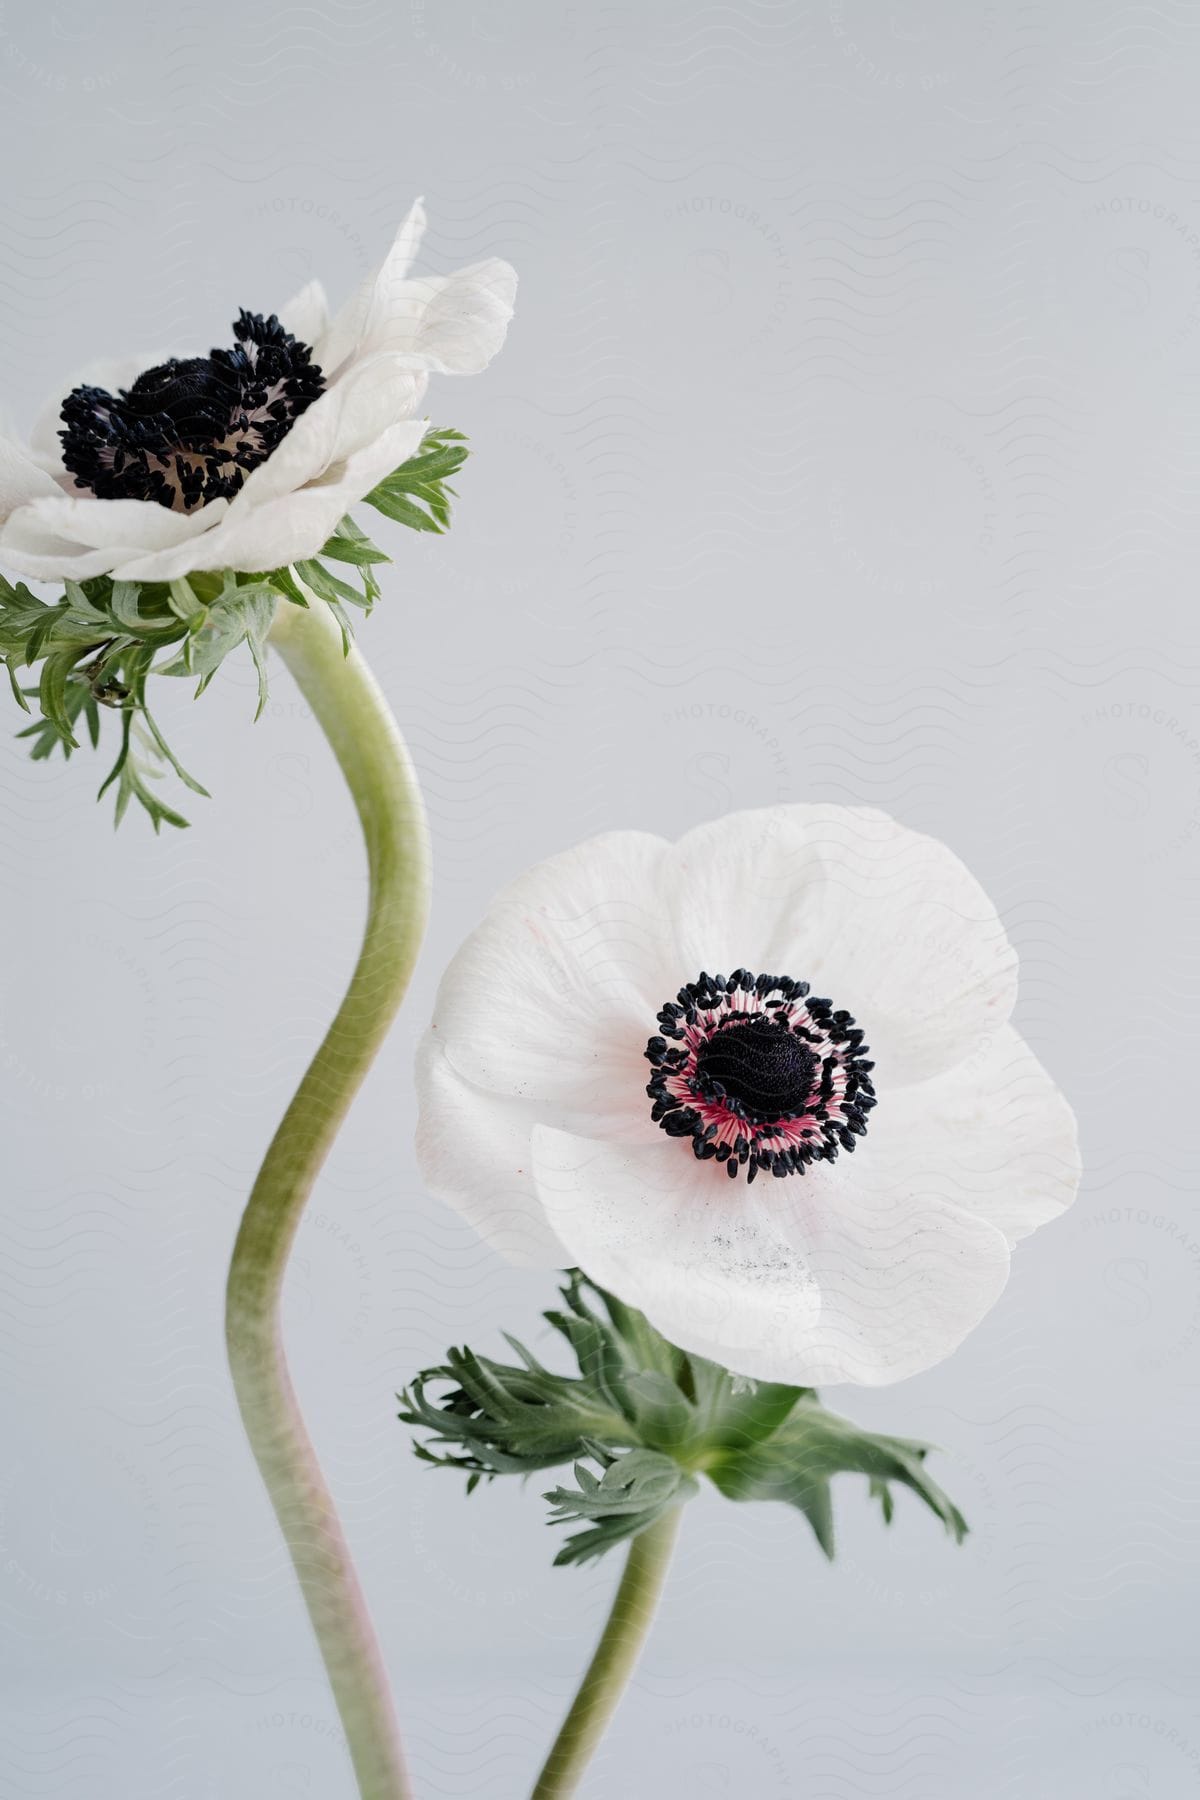 Two delicate white anemone flowers with dark centers, standing out against a light background.